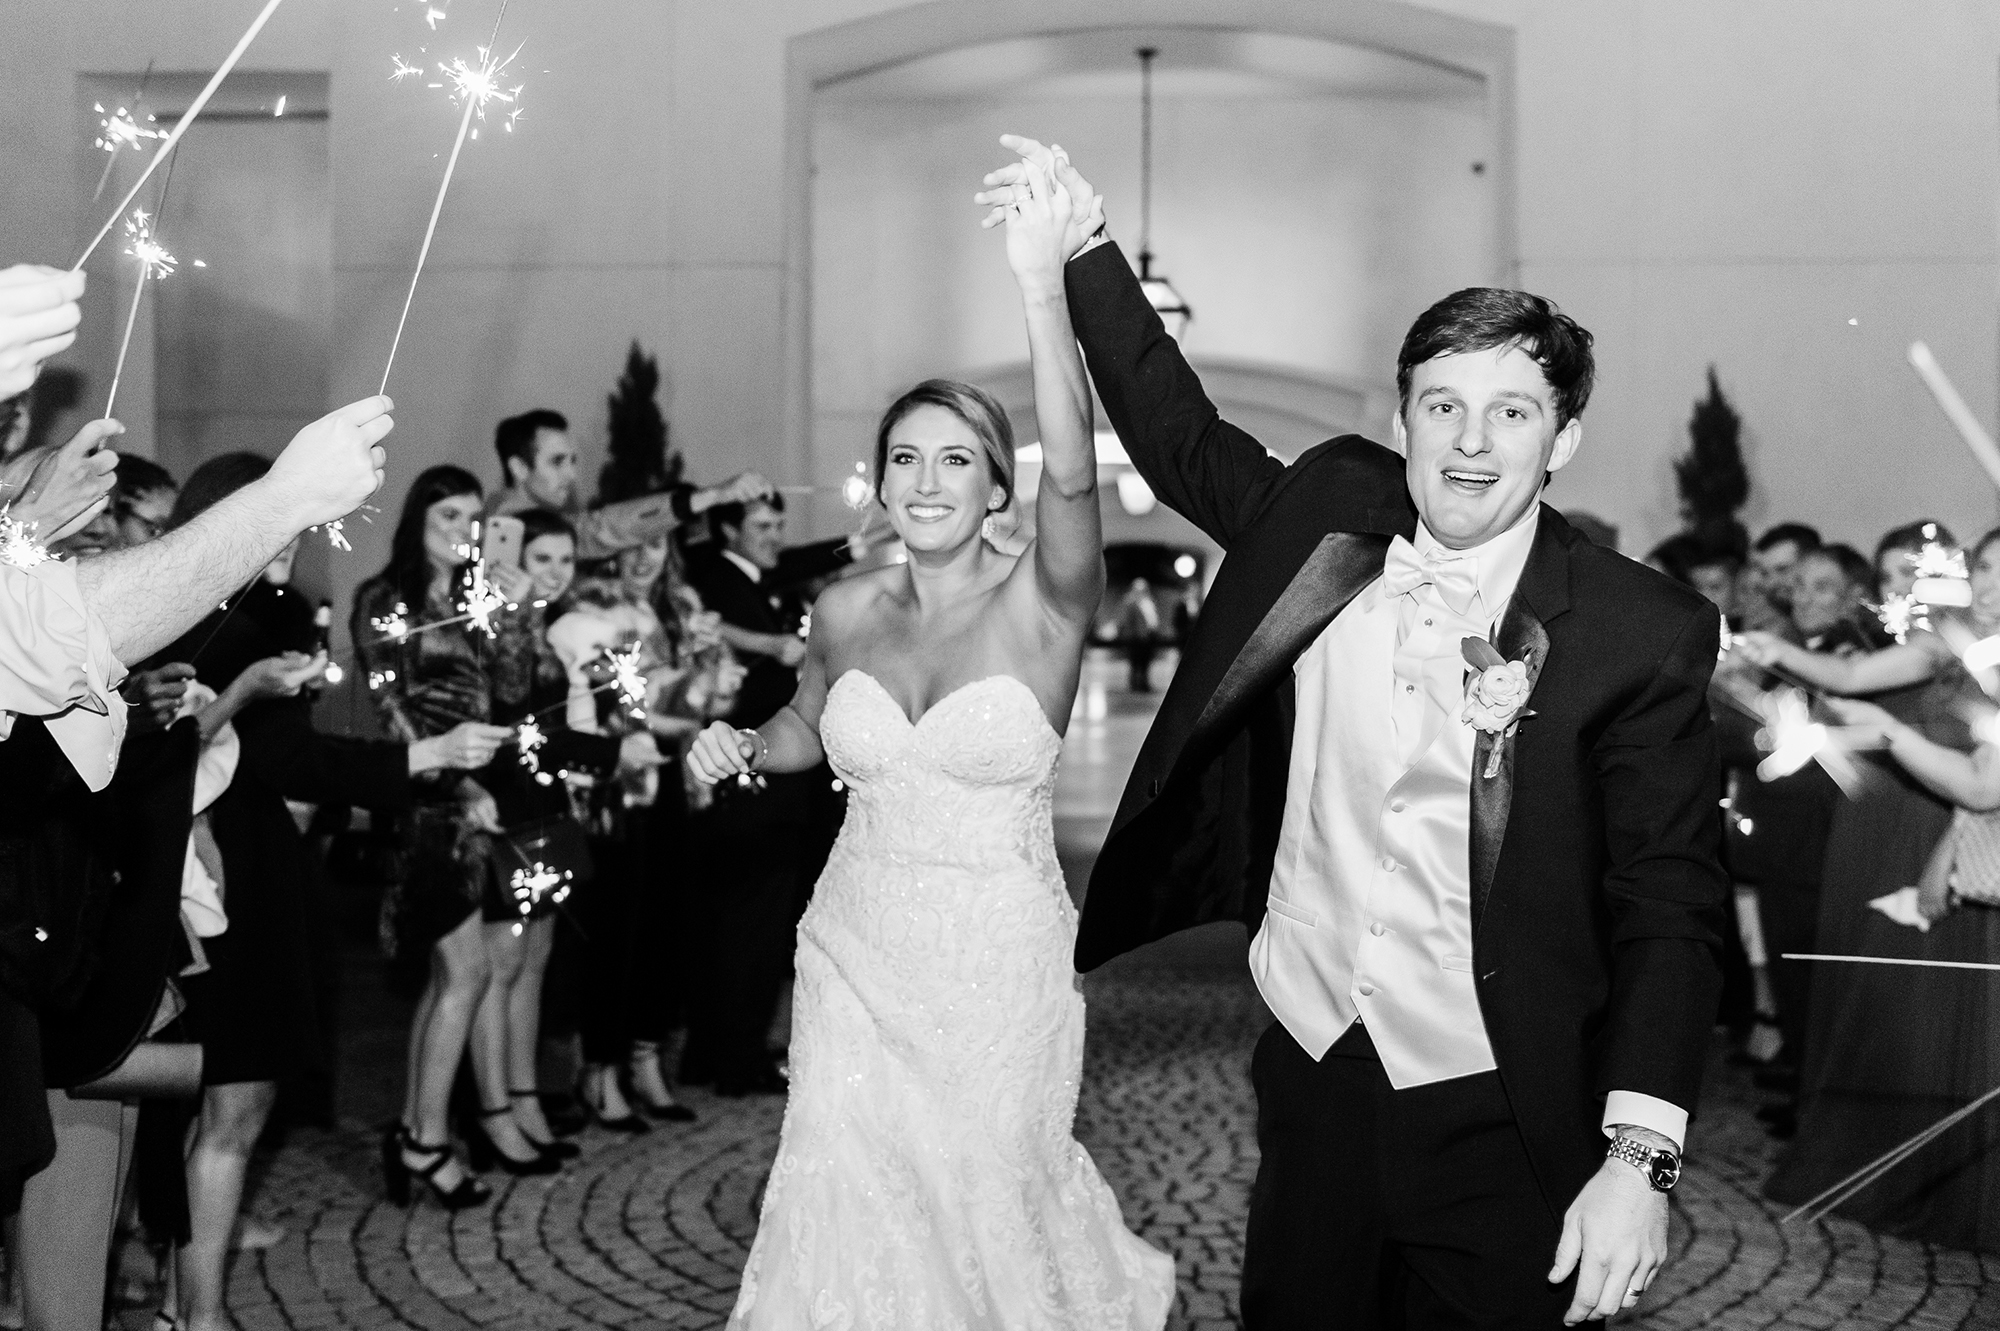 Bride and groom exiting reception with sparklers